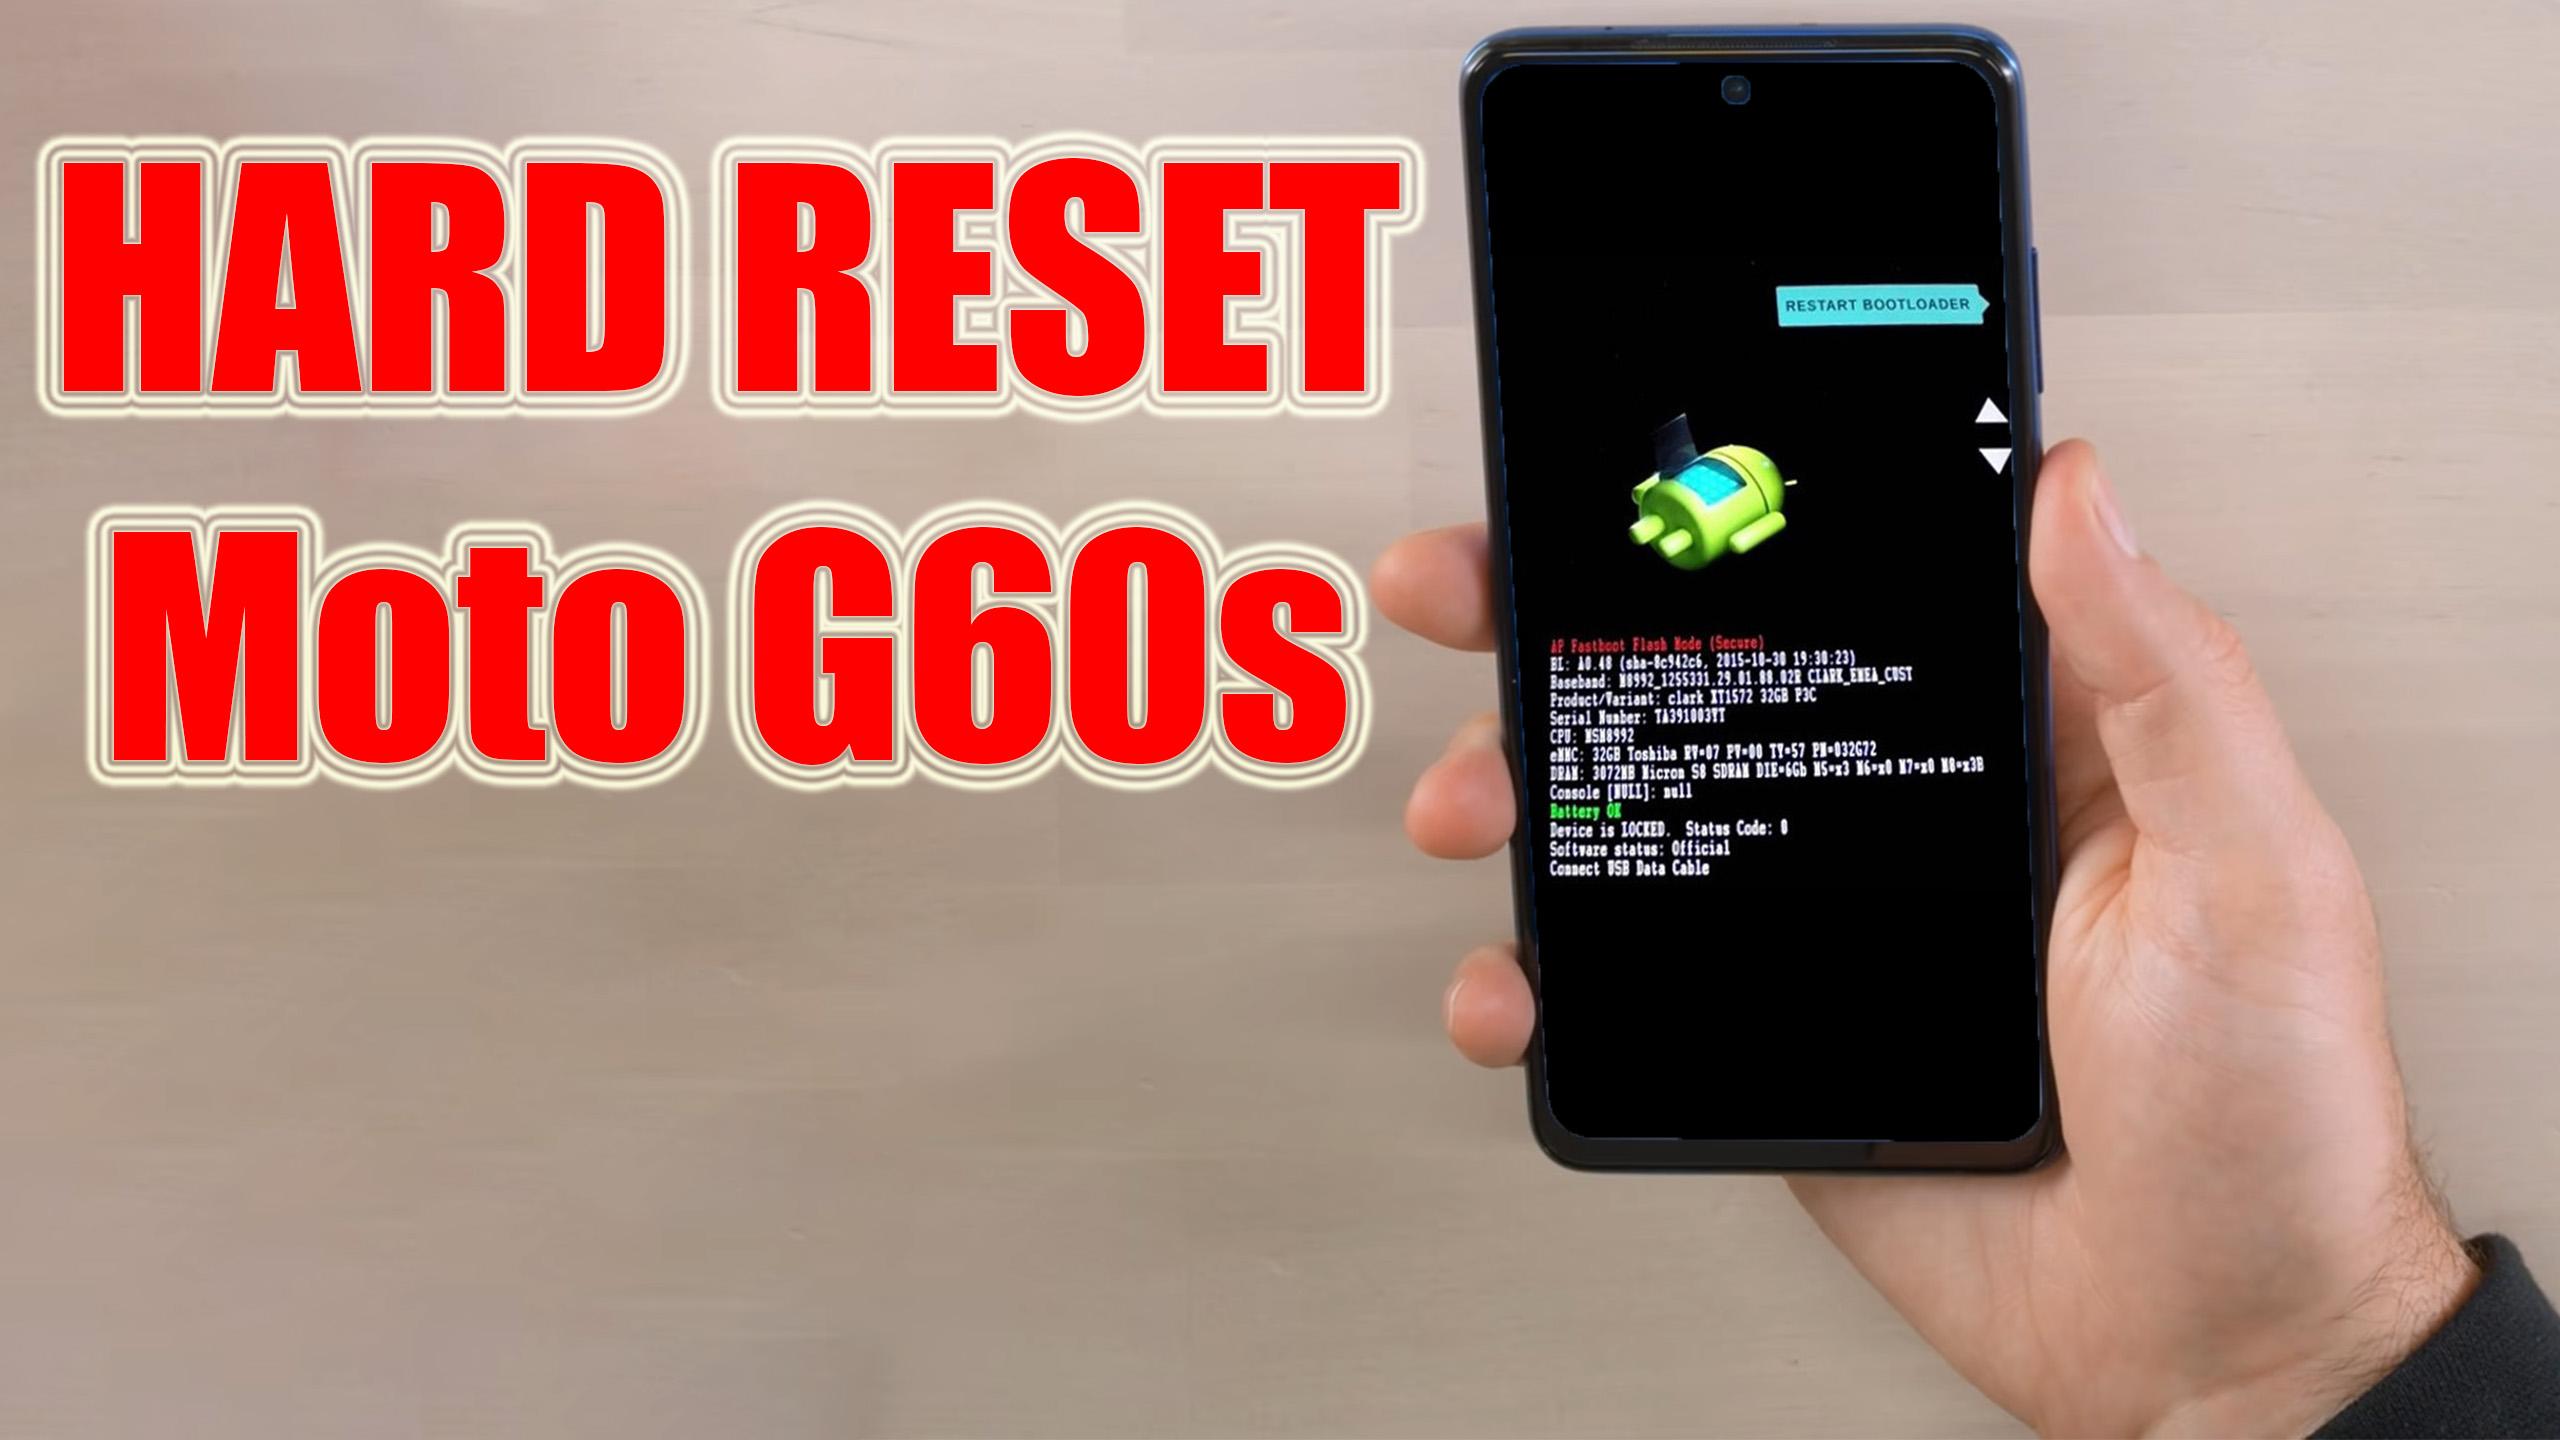 Moto g pure factory reset without password